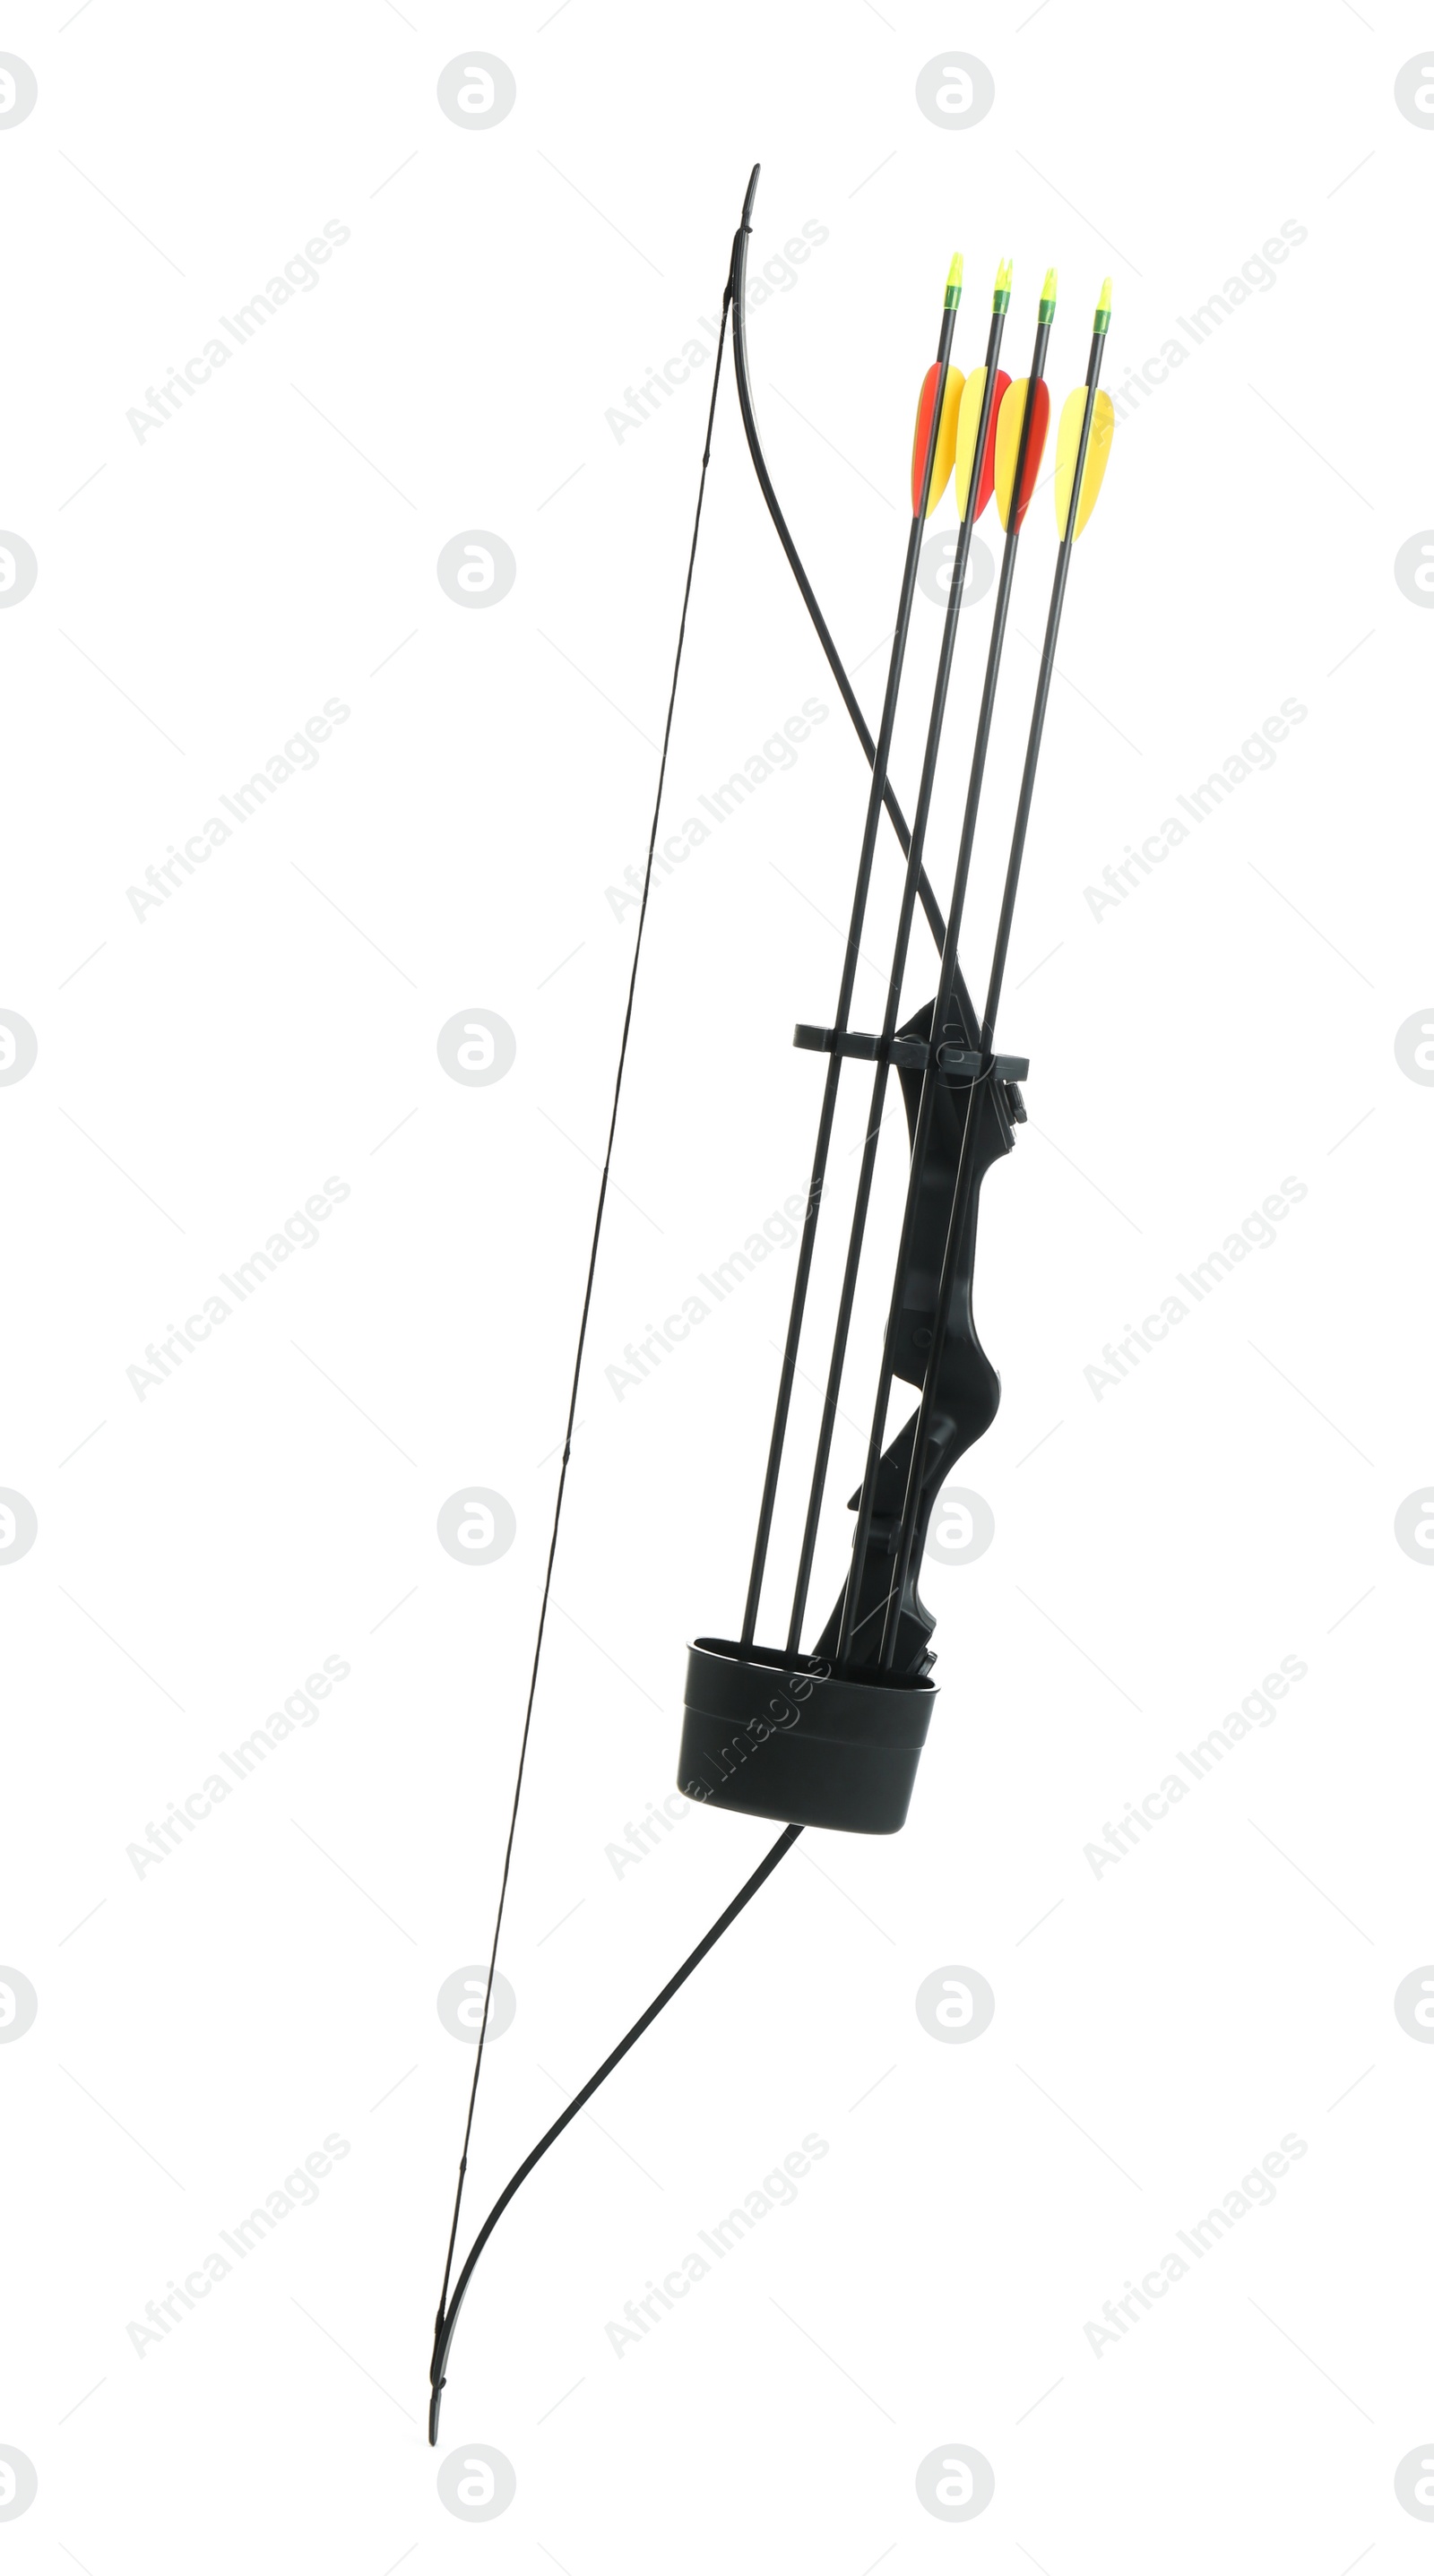 Photo of Black bow and plastic arrows on white background. Archery sports equipment